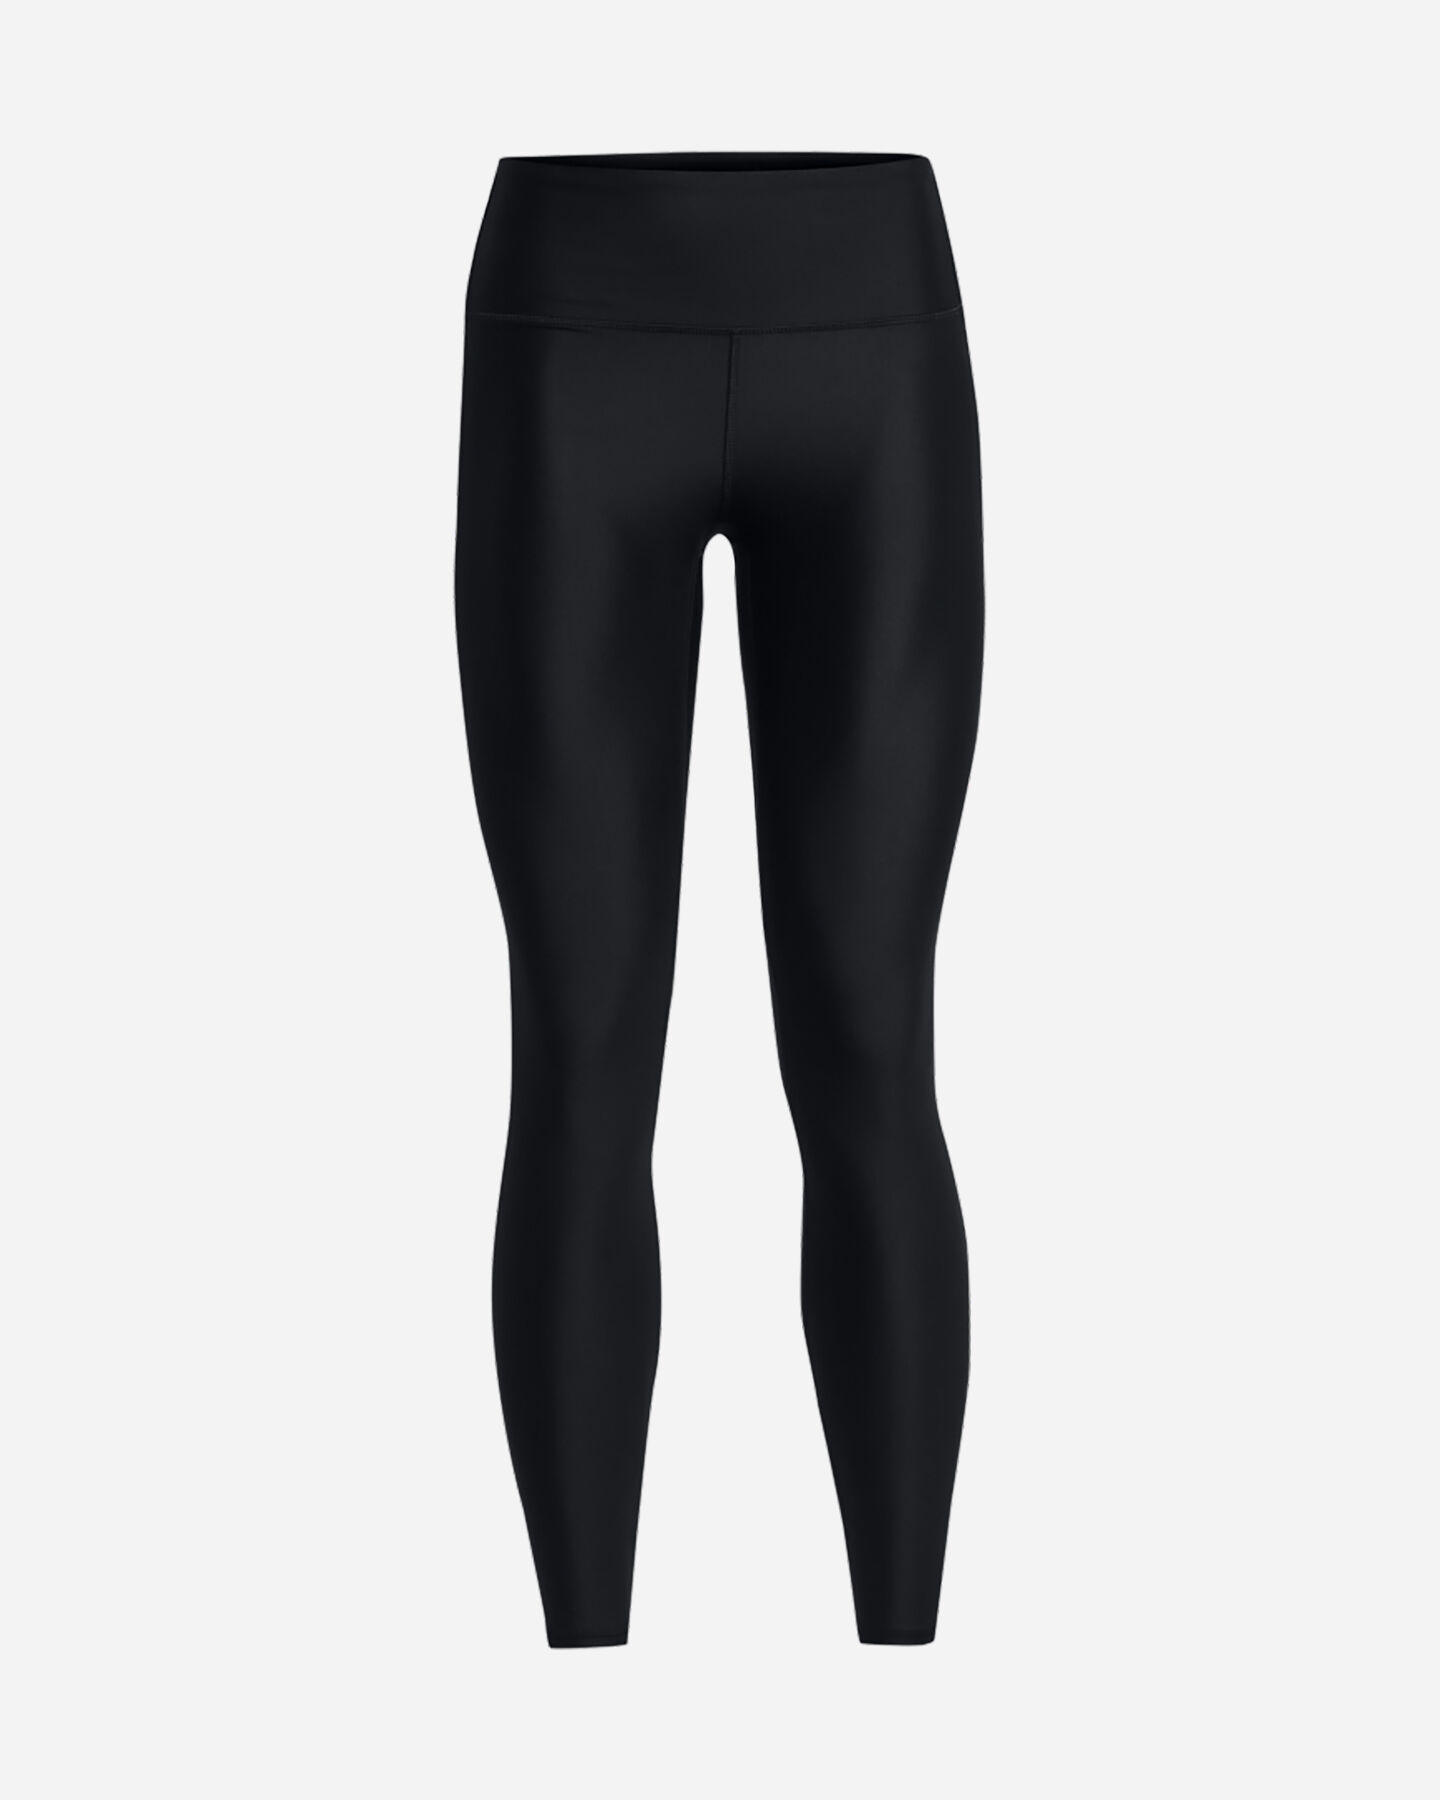  Leggings UNDER ARMOUR VANISH BRANDED W S5641031|0004|XS scatto 0